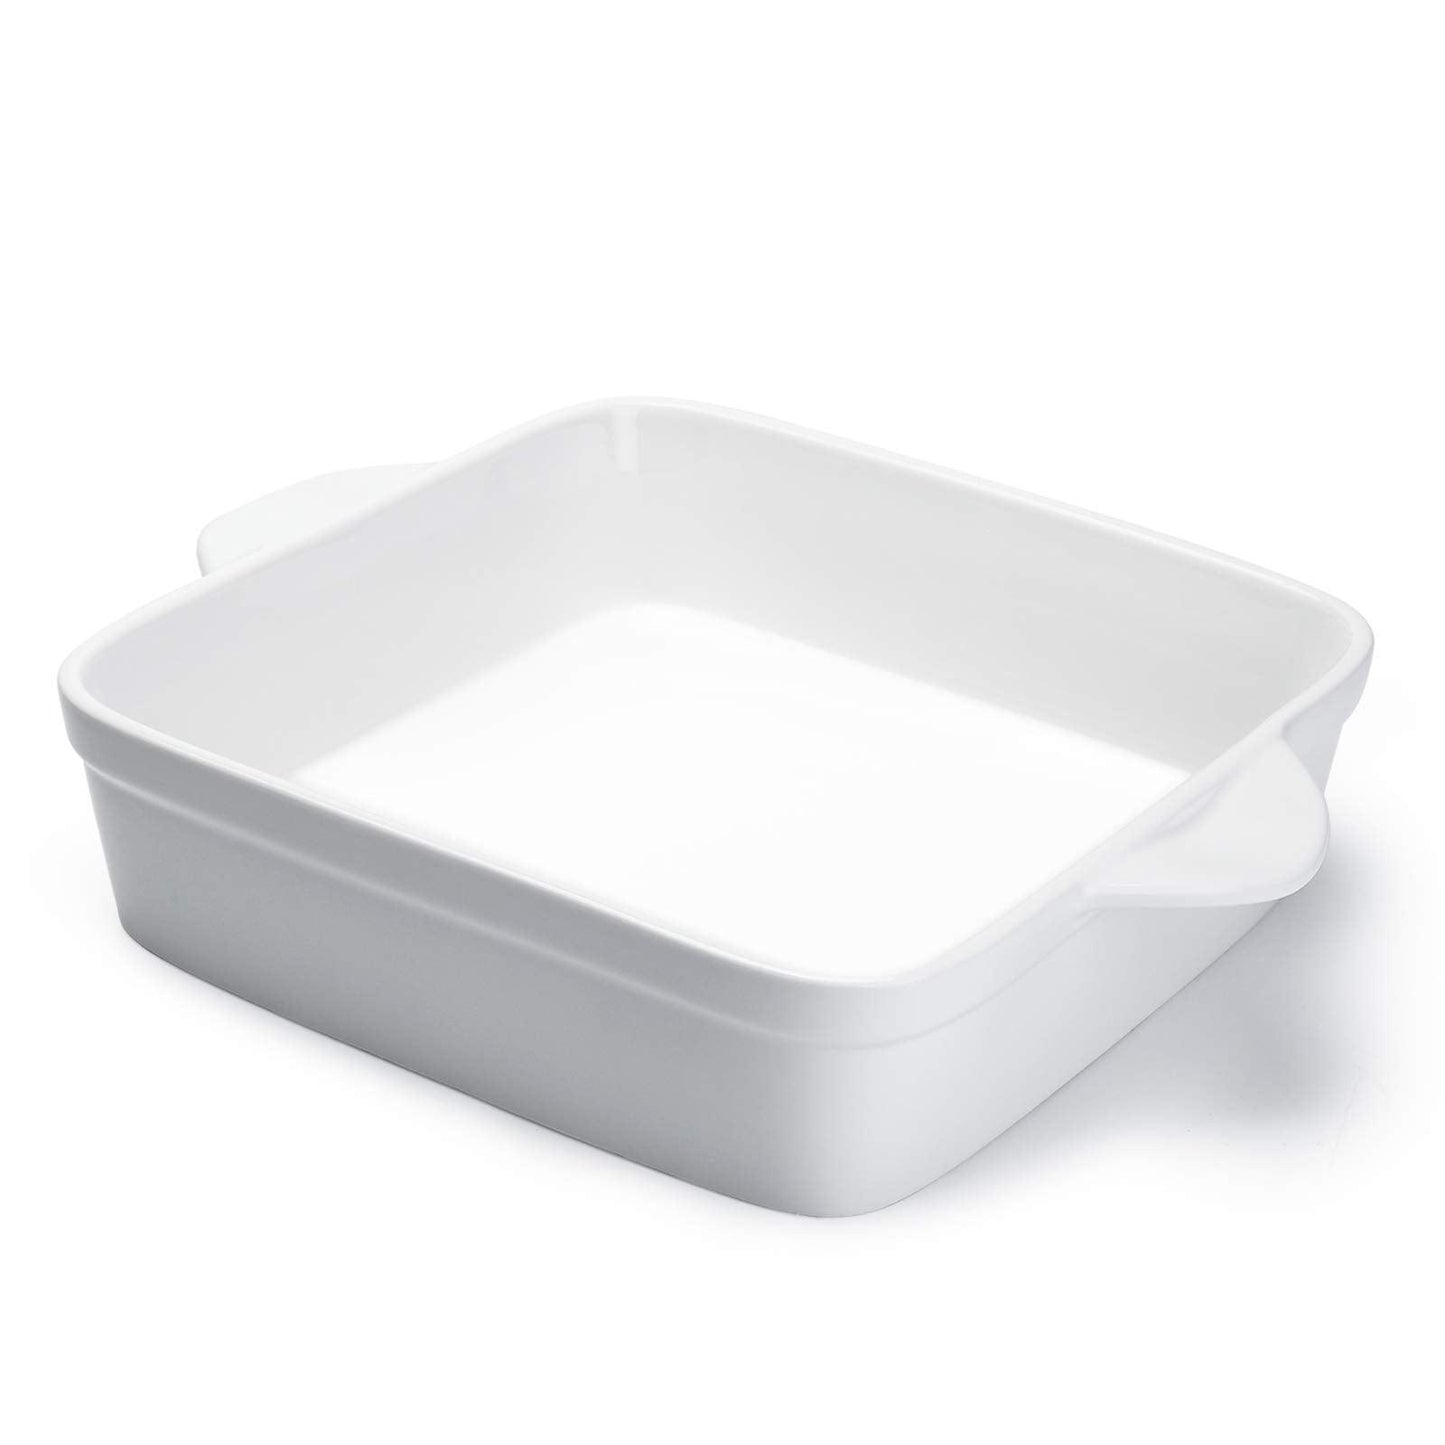 Sweese 8x8 inch Square Porcelain Baking Dish with Double Handles - Non-Stick Oven Casserole Pan for Brownie, Lasagna, Roasting - Great for Serving or Cooking - CookCave